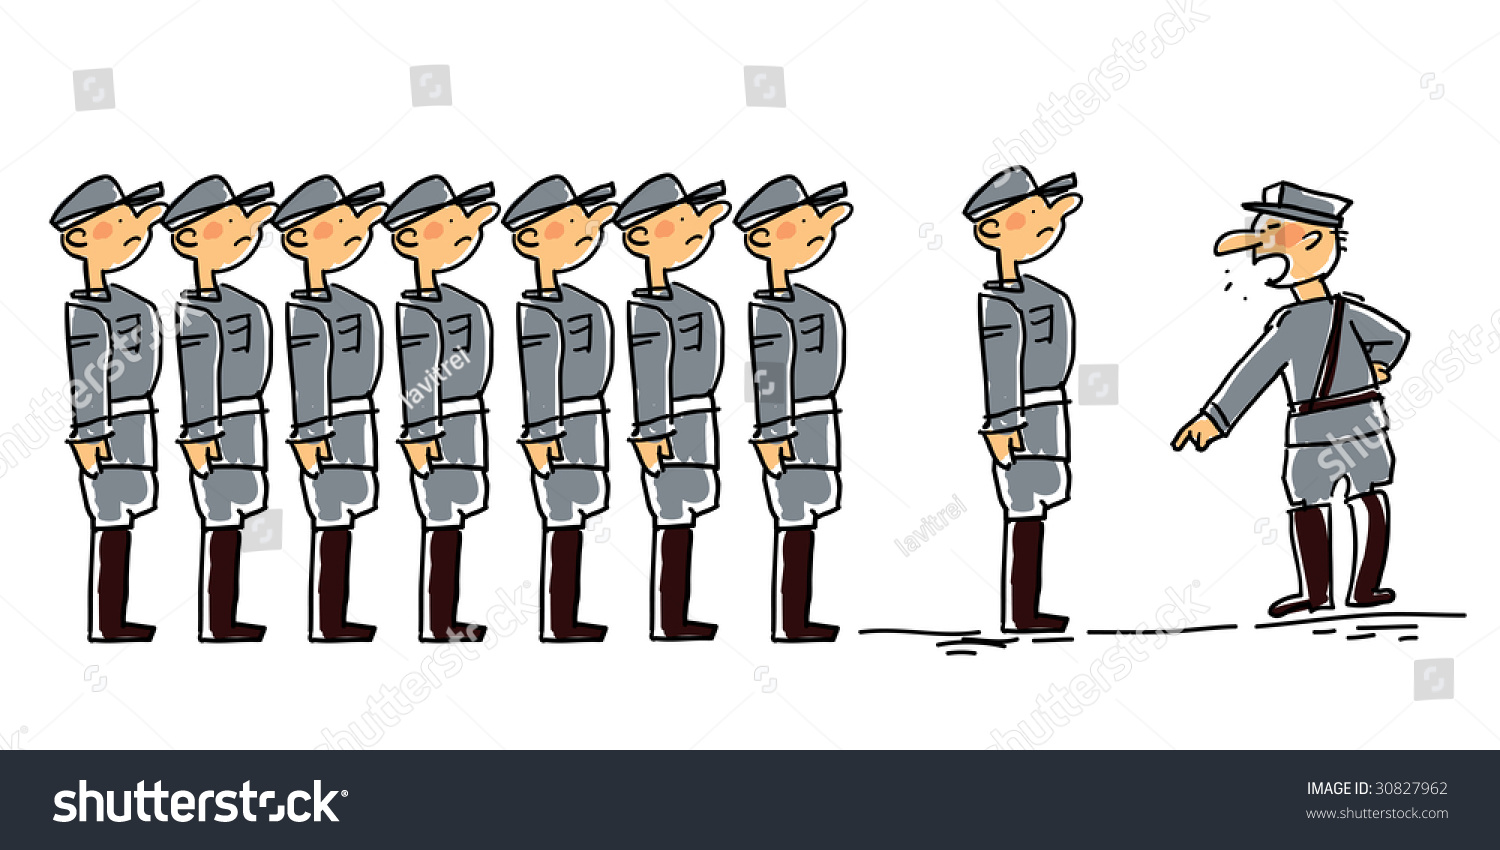 Vector Cartoon Related With Military Man, Soldiers And/Or Army